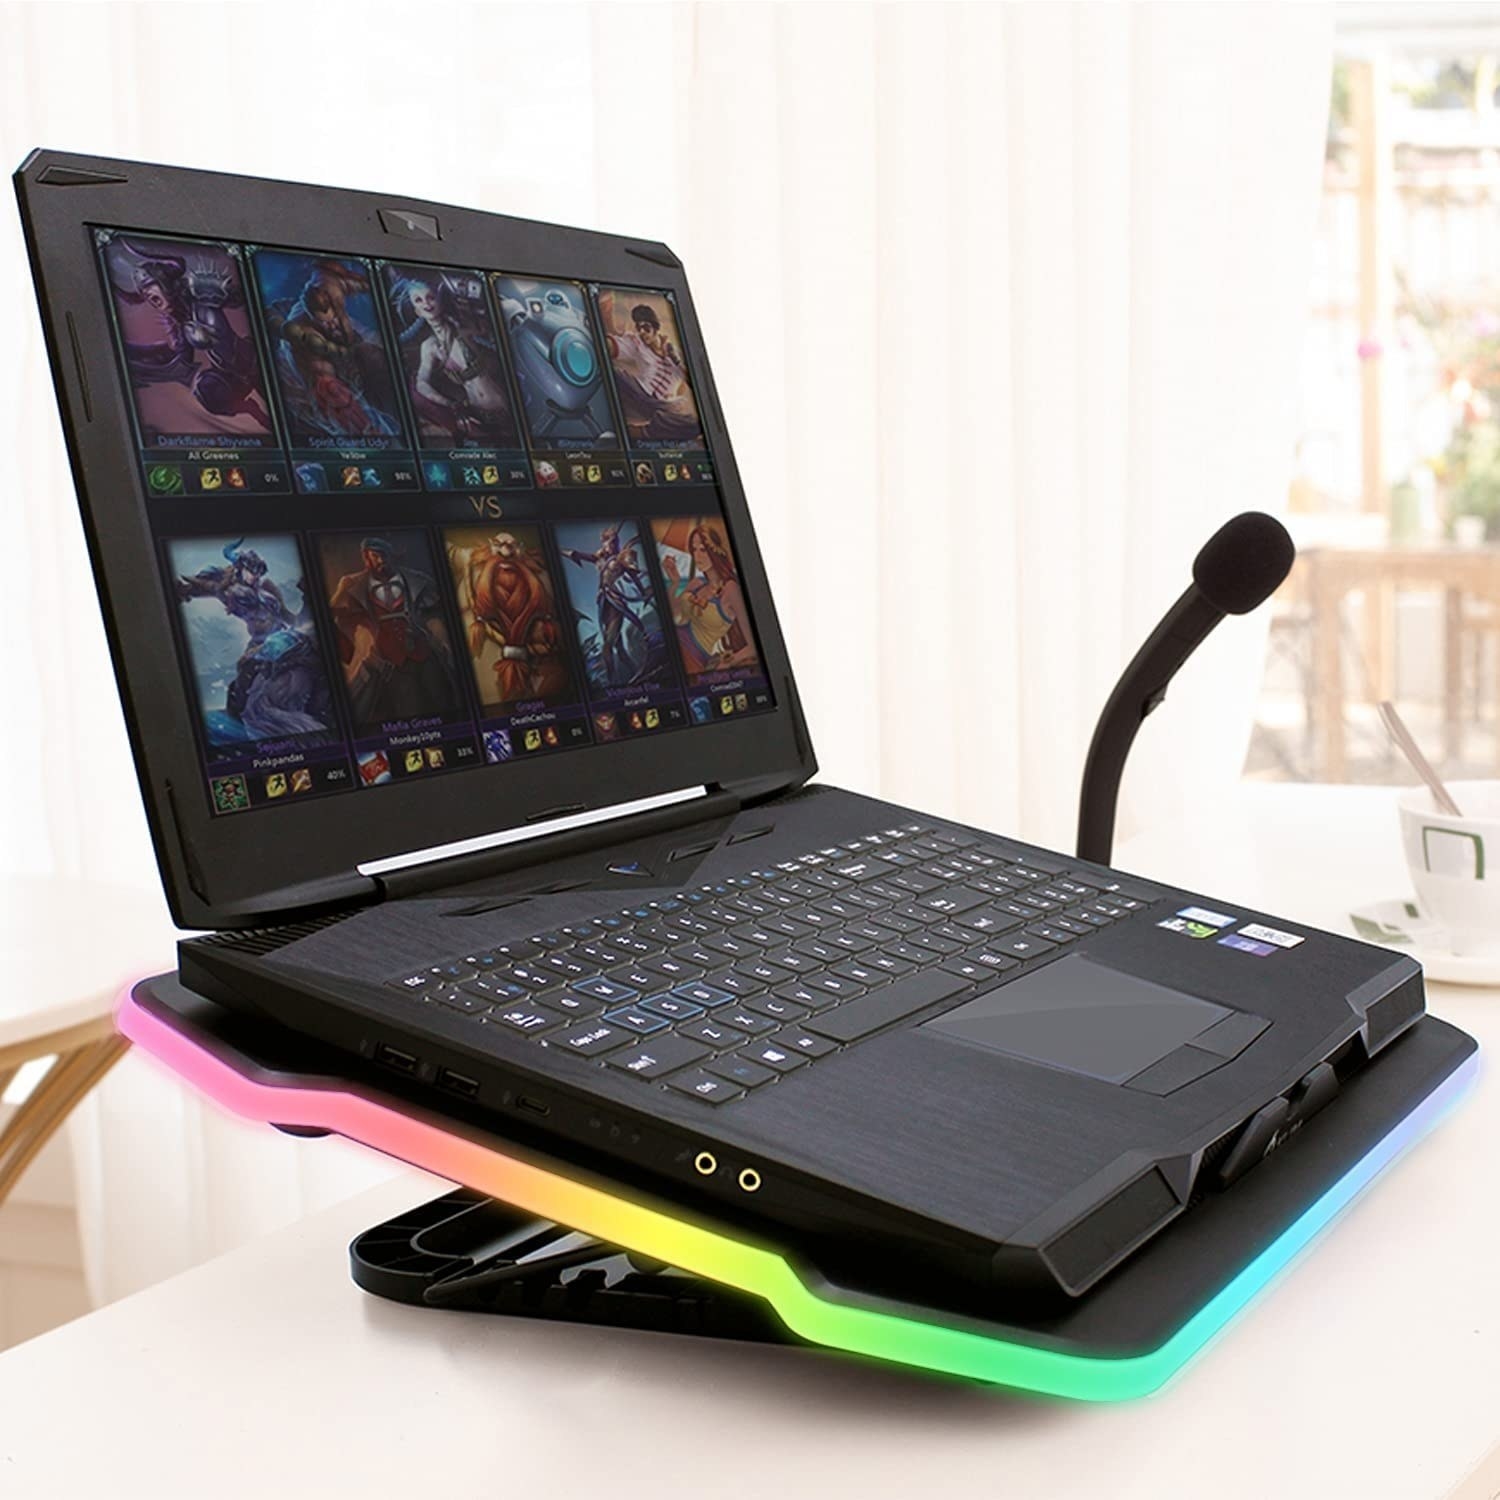 A gaming laptop on the laptop cooler